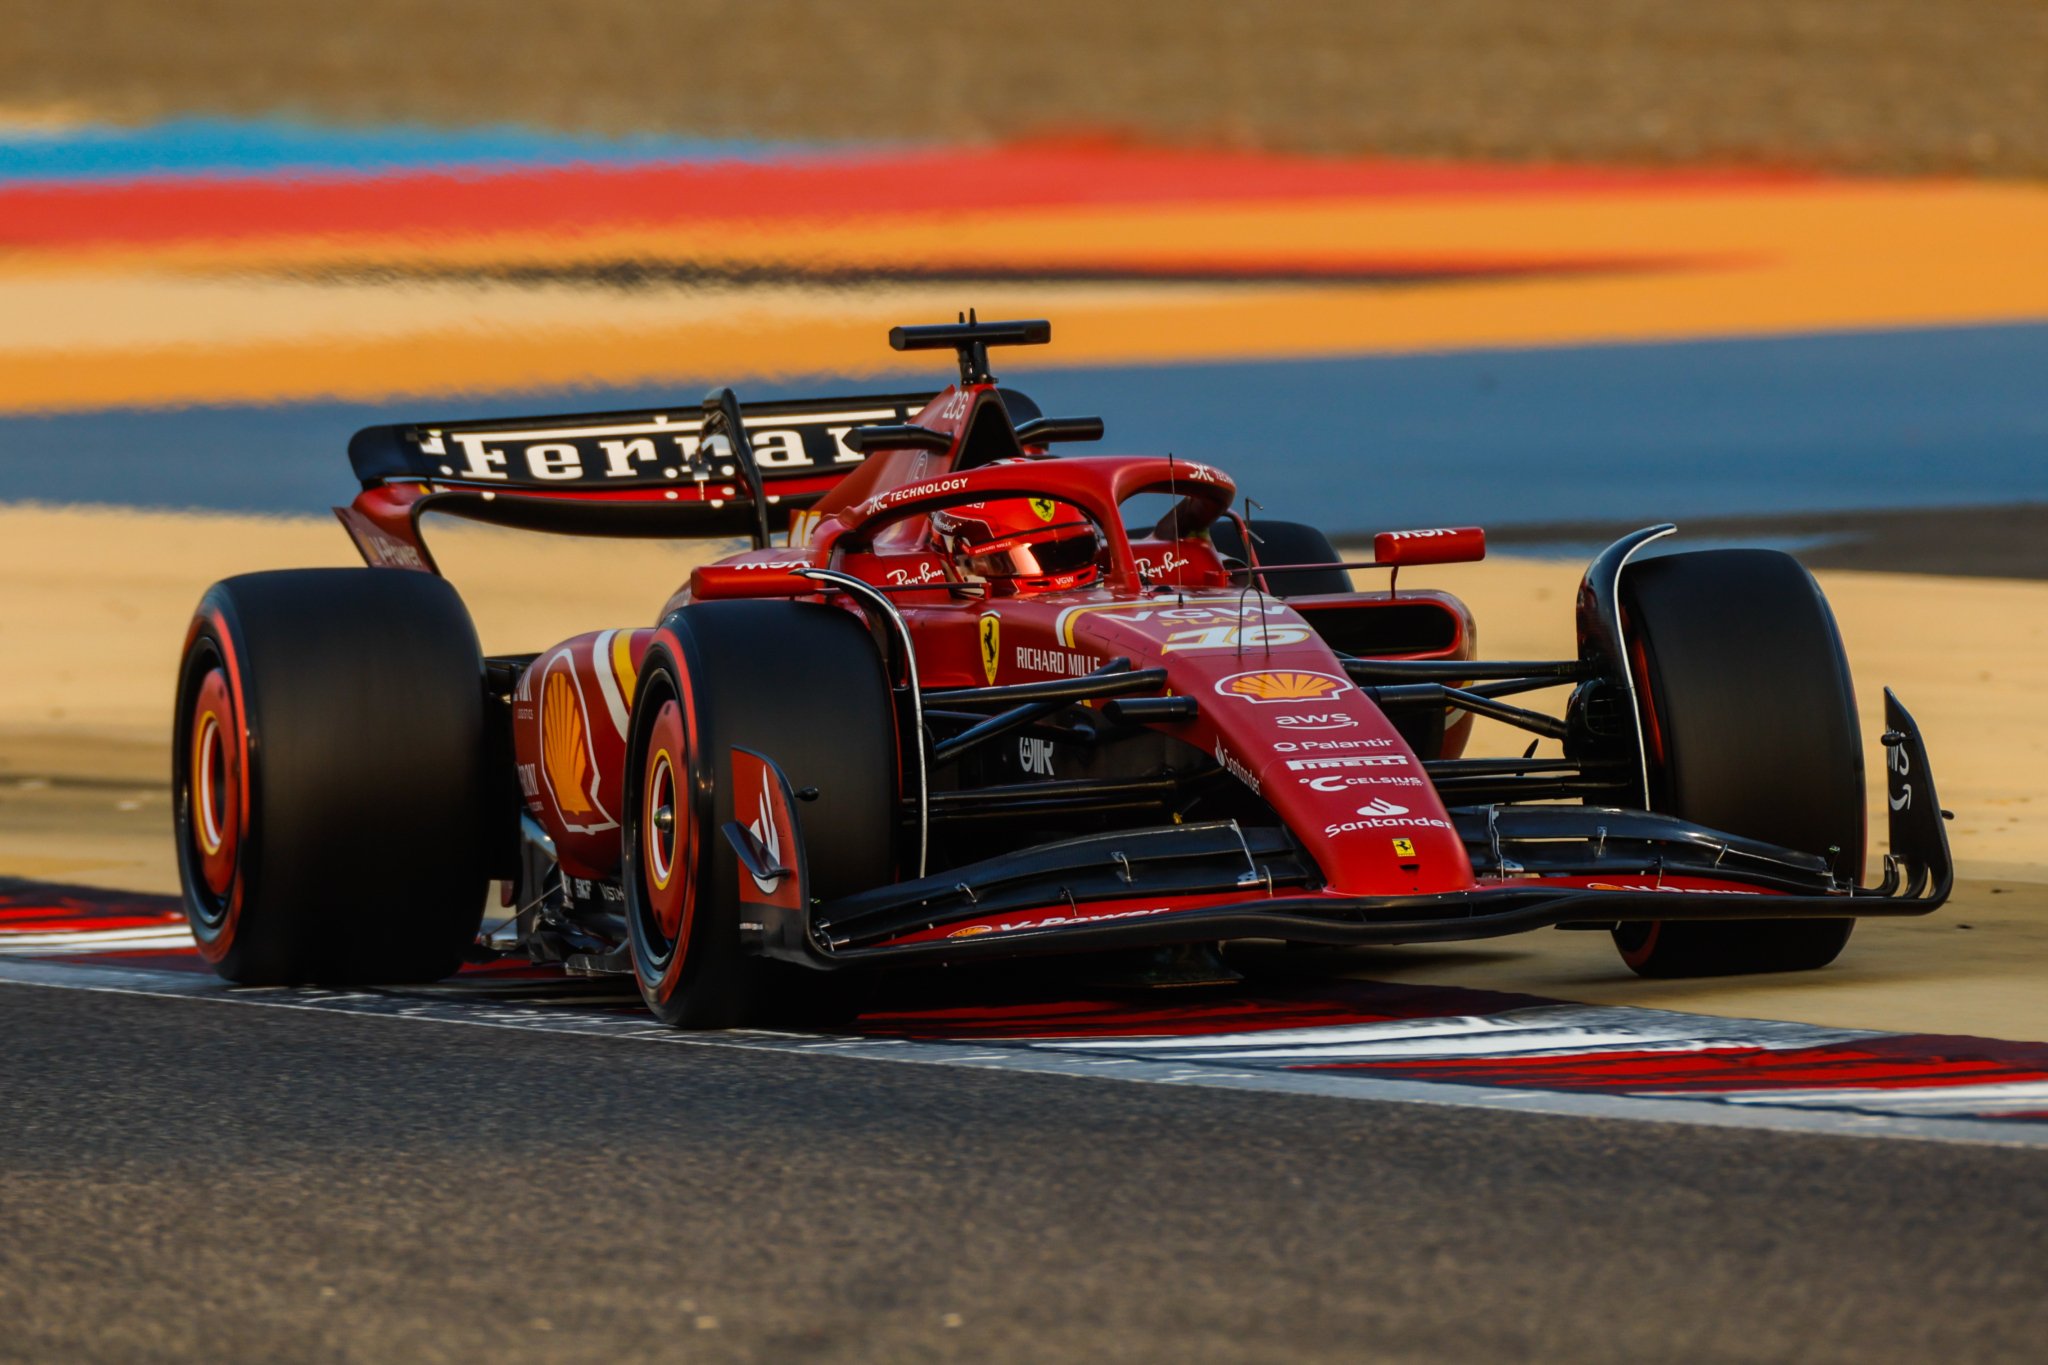 Pirelli: F1 teams ‘working hard’ to reduce overheating’ in new cars as Ferrari goes fastest